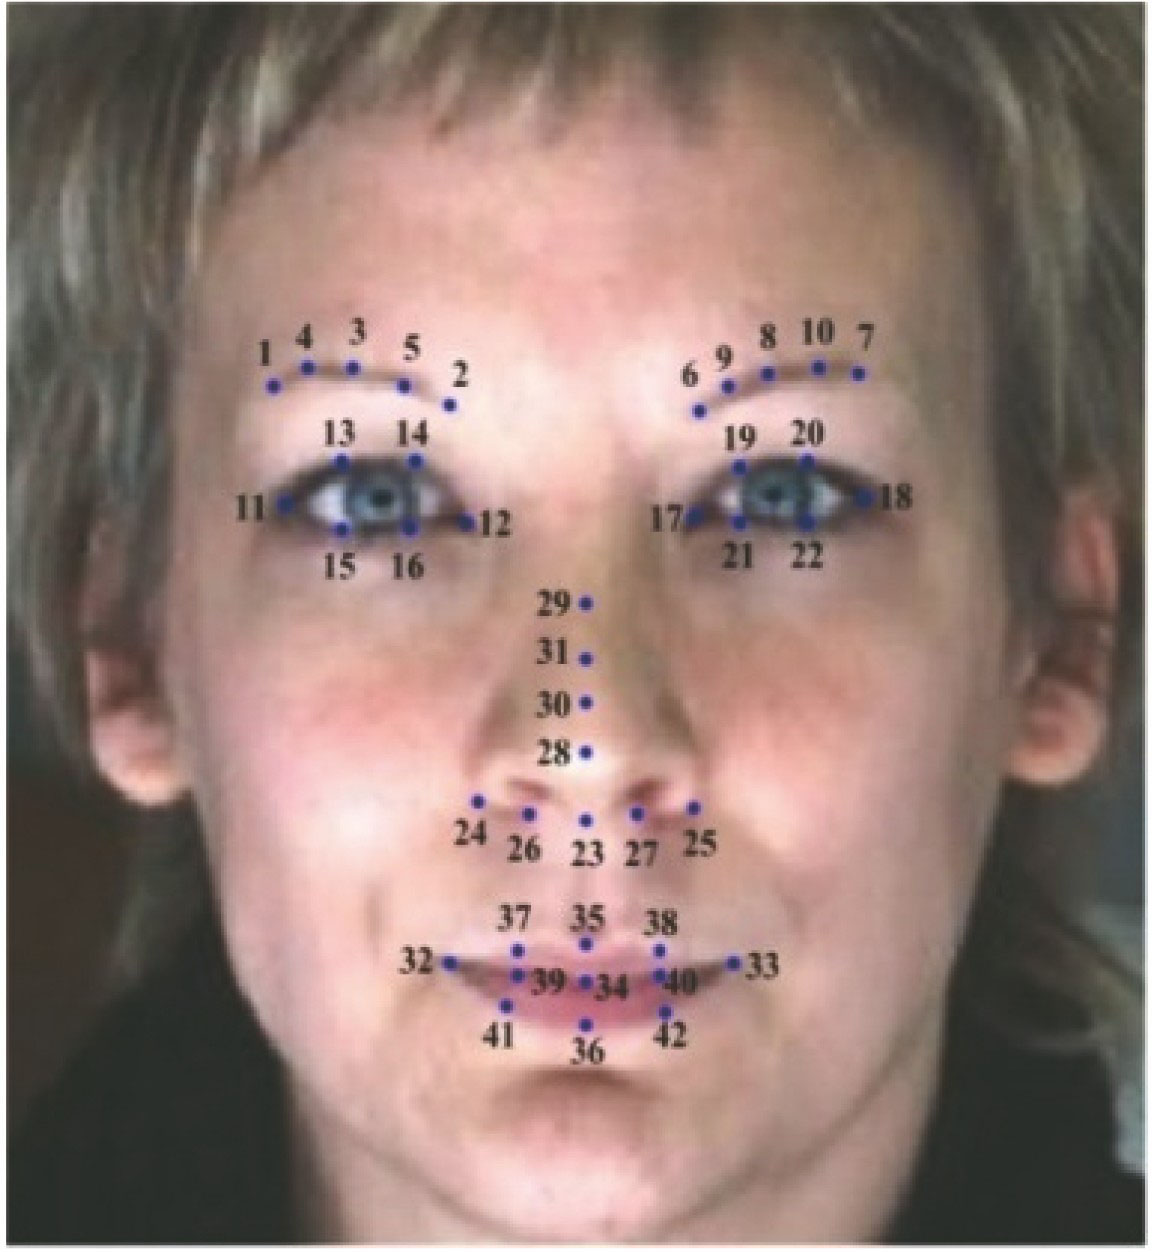 Annotation order of 42 facial feature points